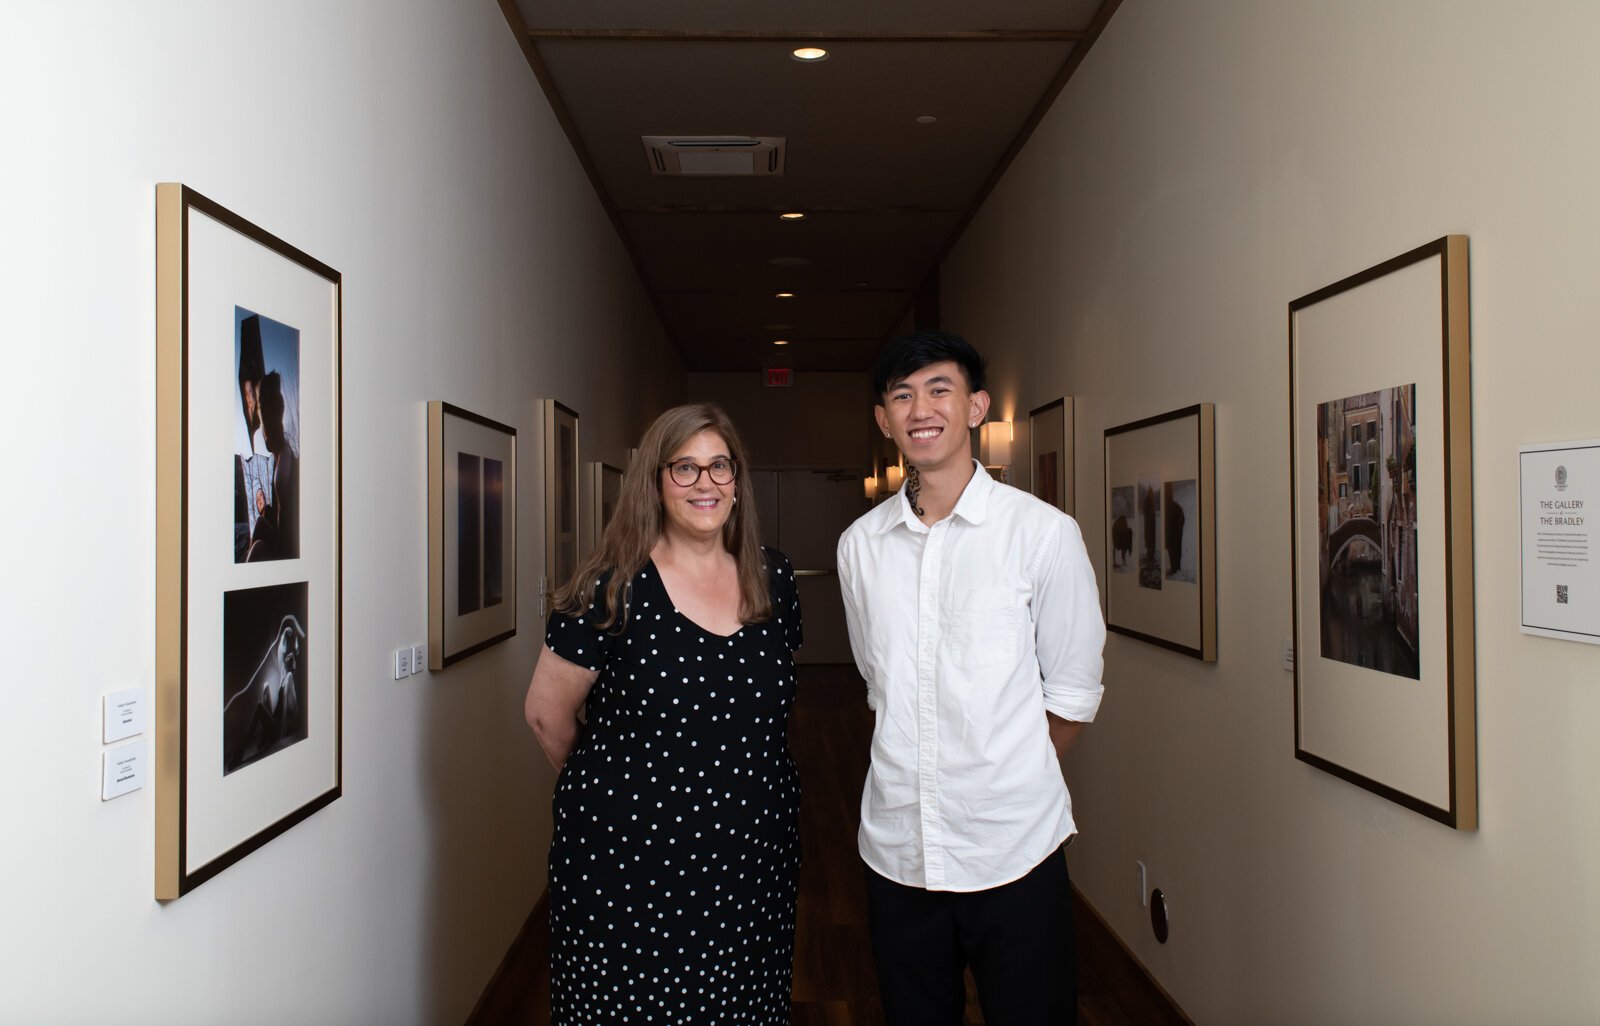 PFW Professor Rebecca Coffman and recent PFW graduate and artist Johnny Min in the new revolving gallery featuring work from Purdue Fort Wayne students, alumni and faculty at The Bradley, 204 W. Main St.